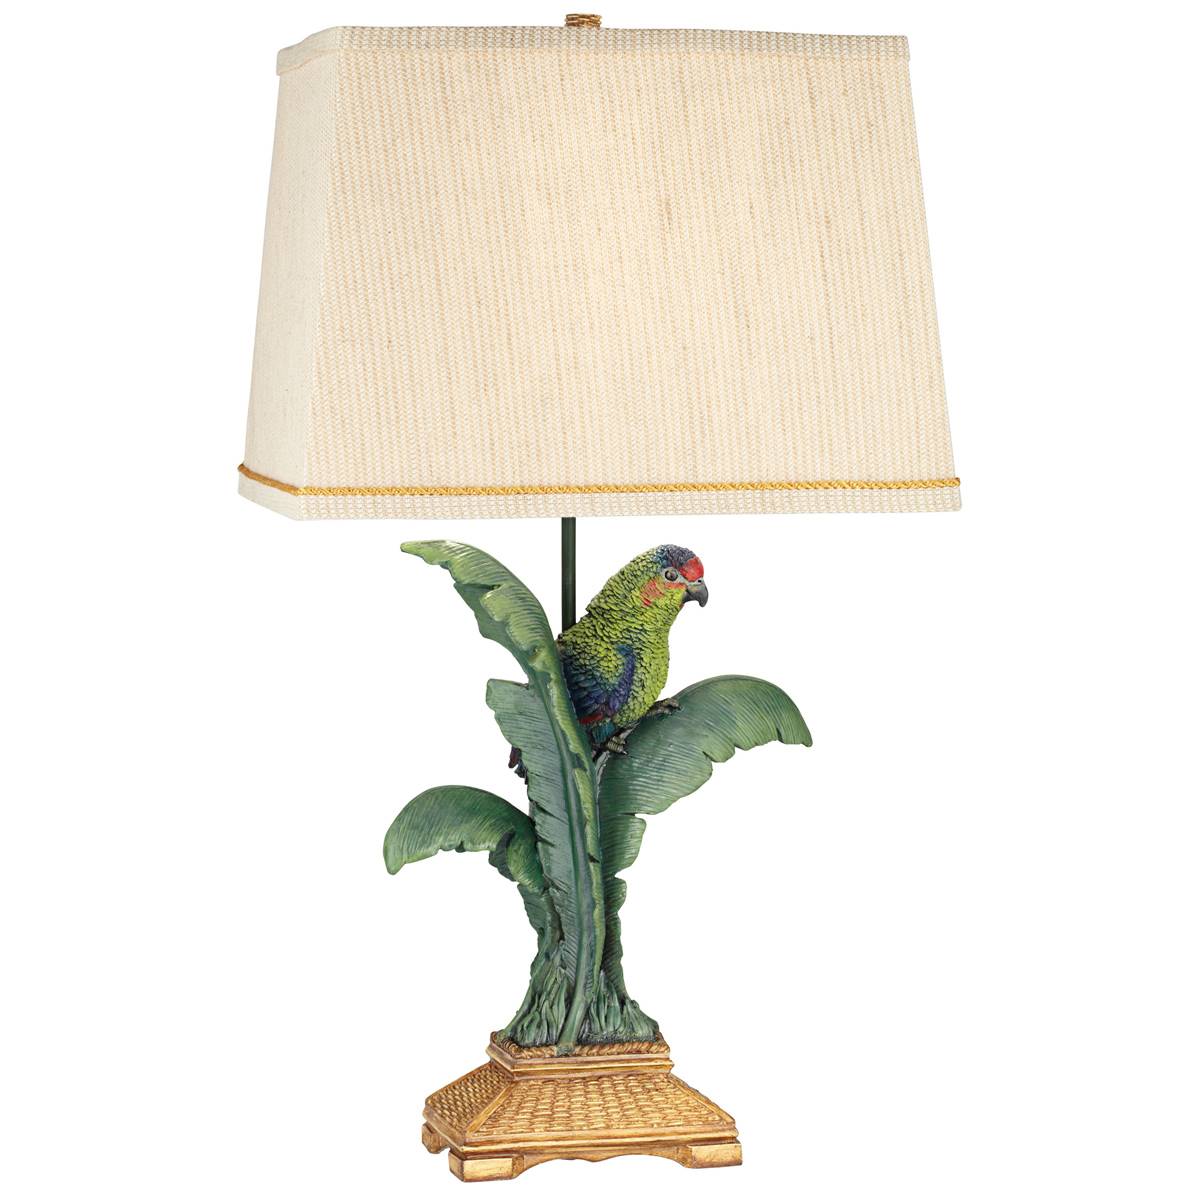 Pacific Coast Lighting Tropical Parrot 29.5in. Table Lamp